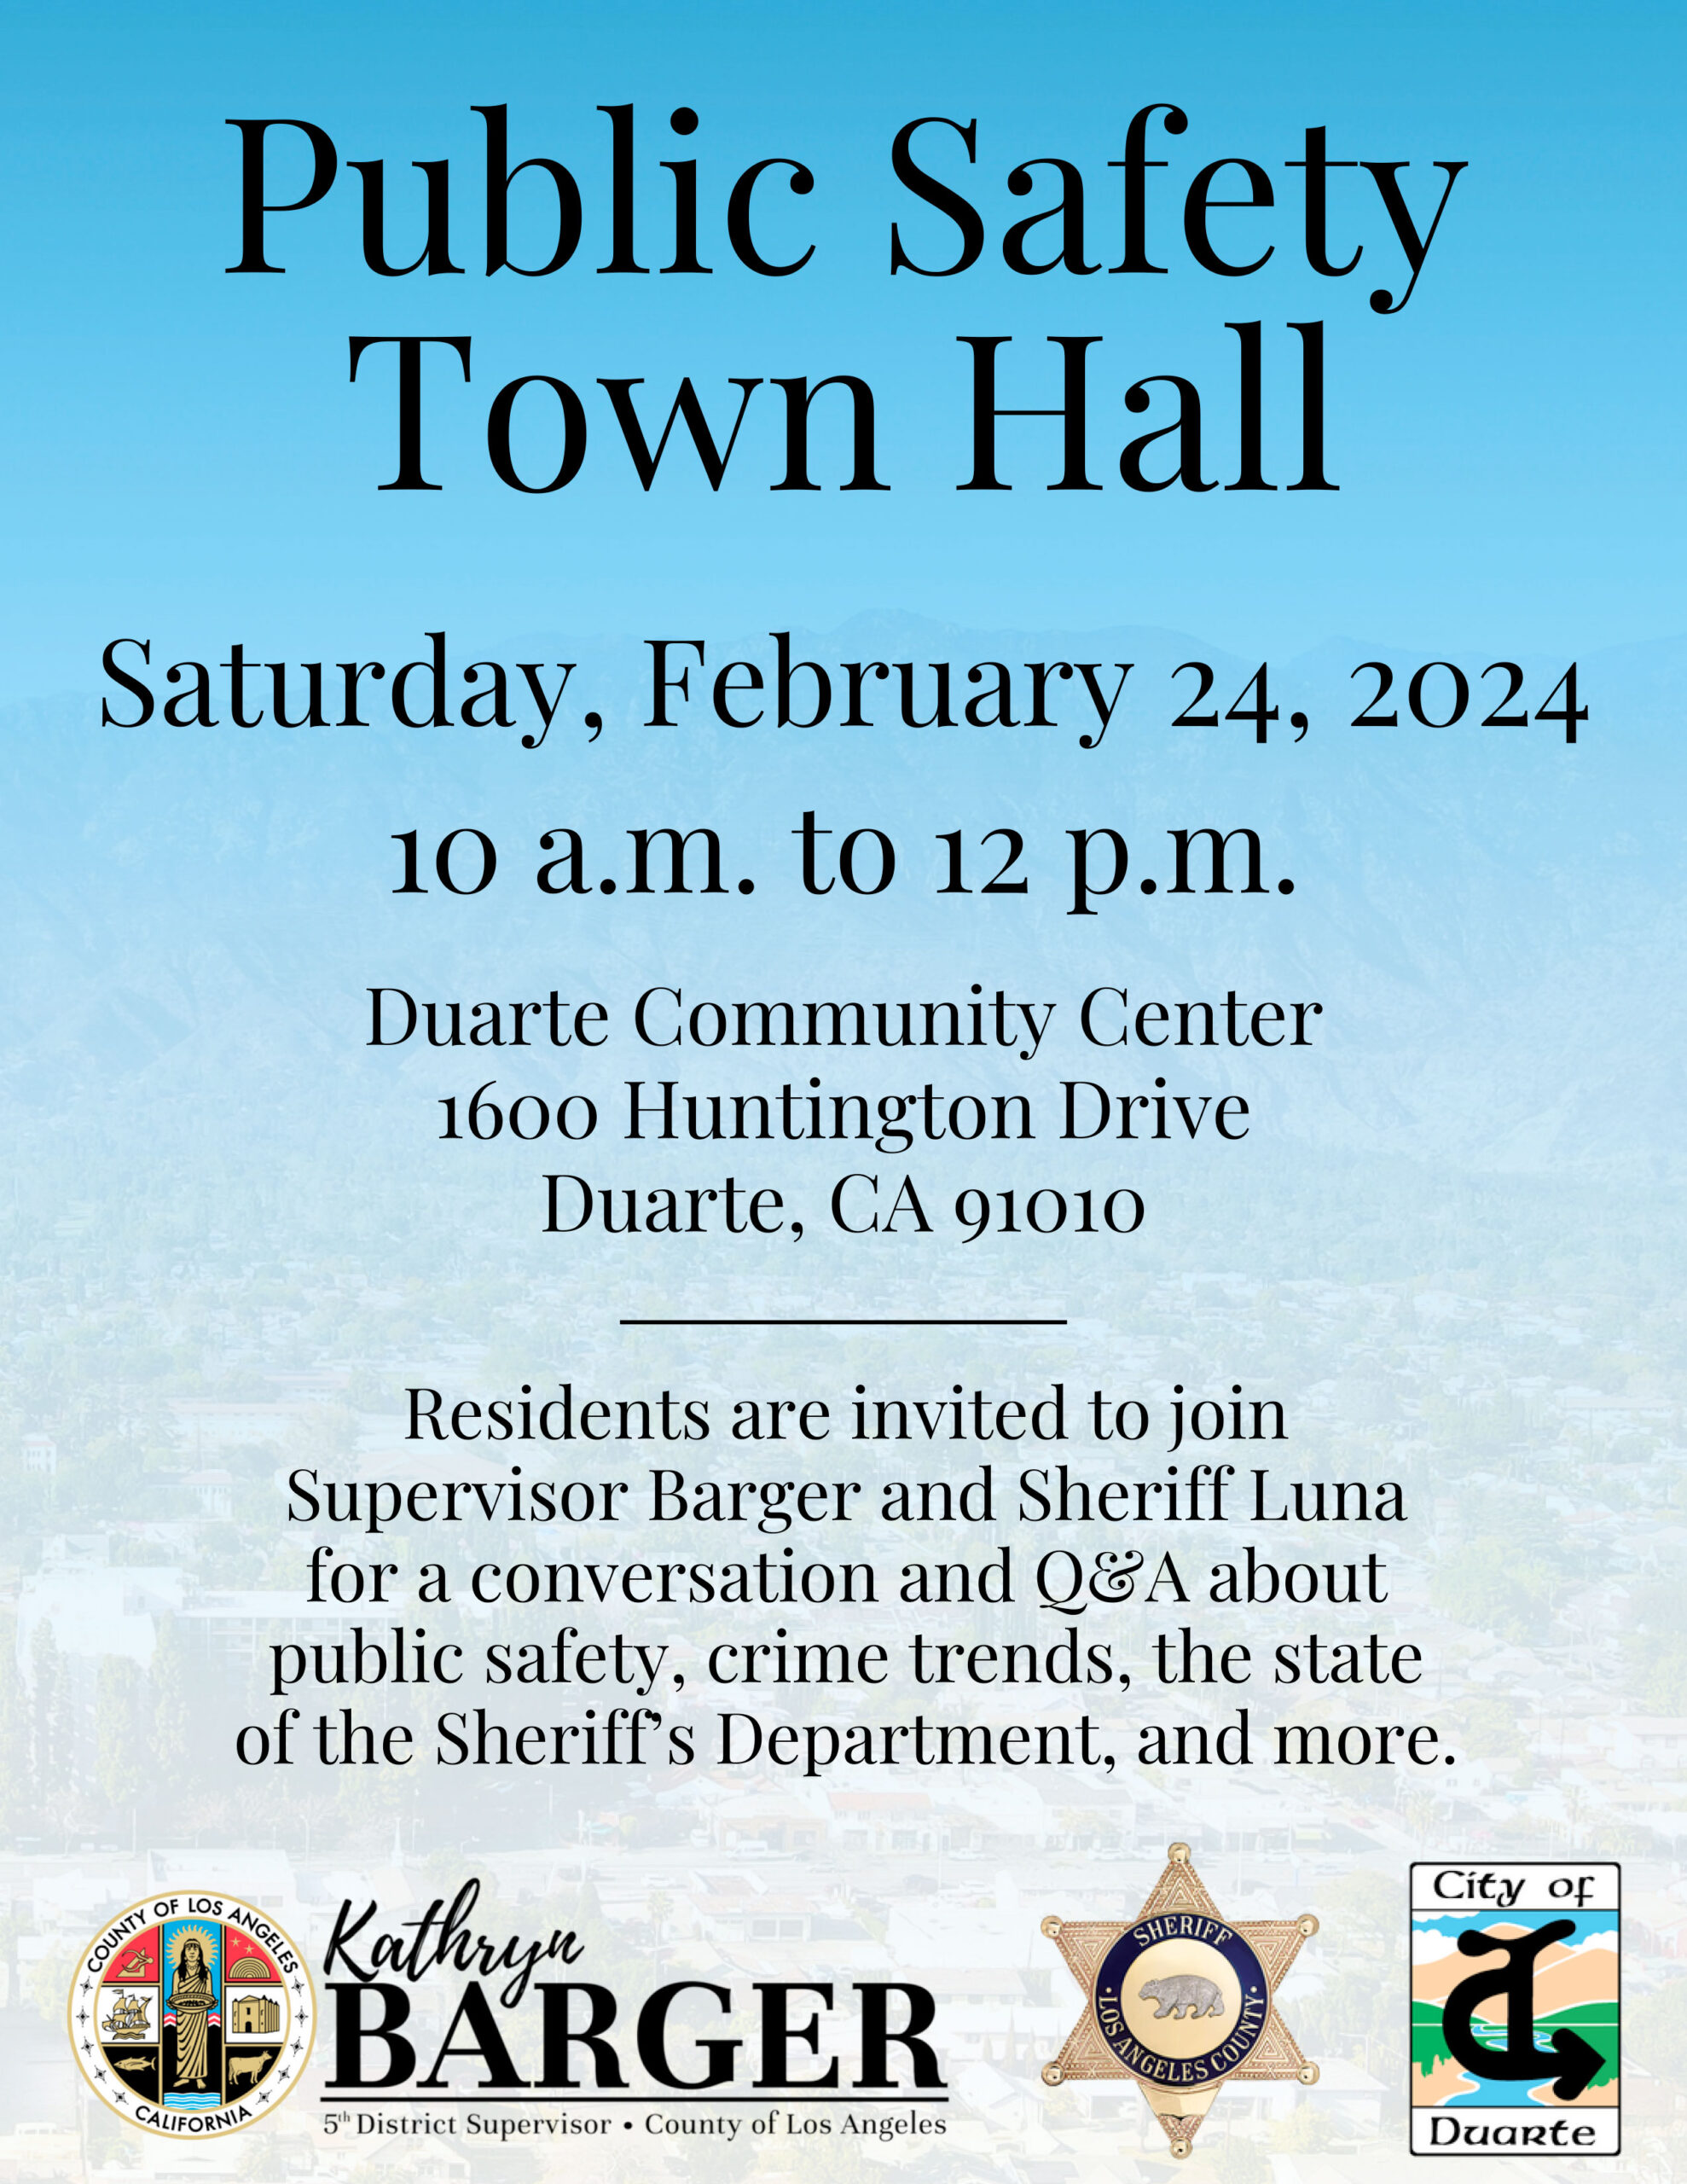 Public Safety Town Hall with Supervisor Kathryn Barger flyer in English